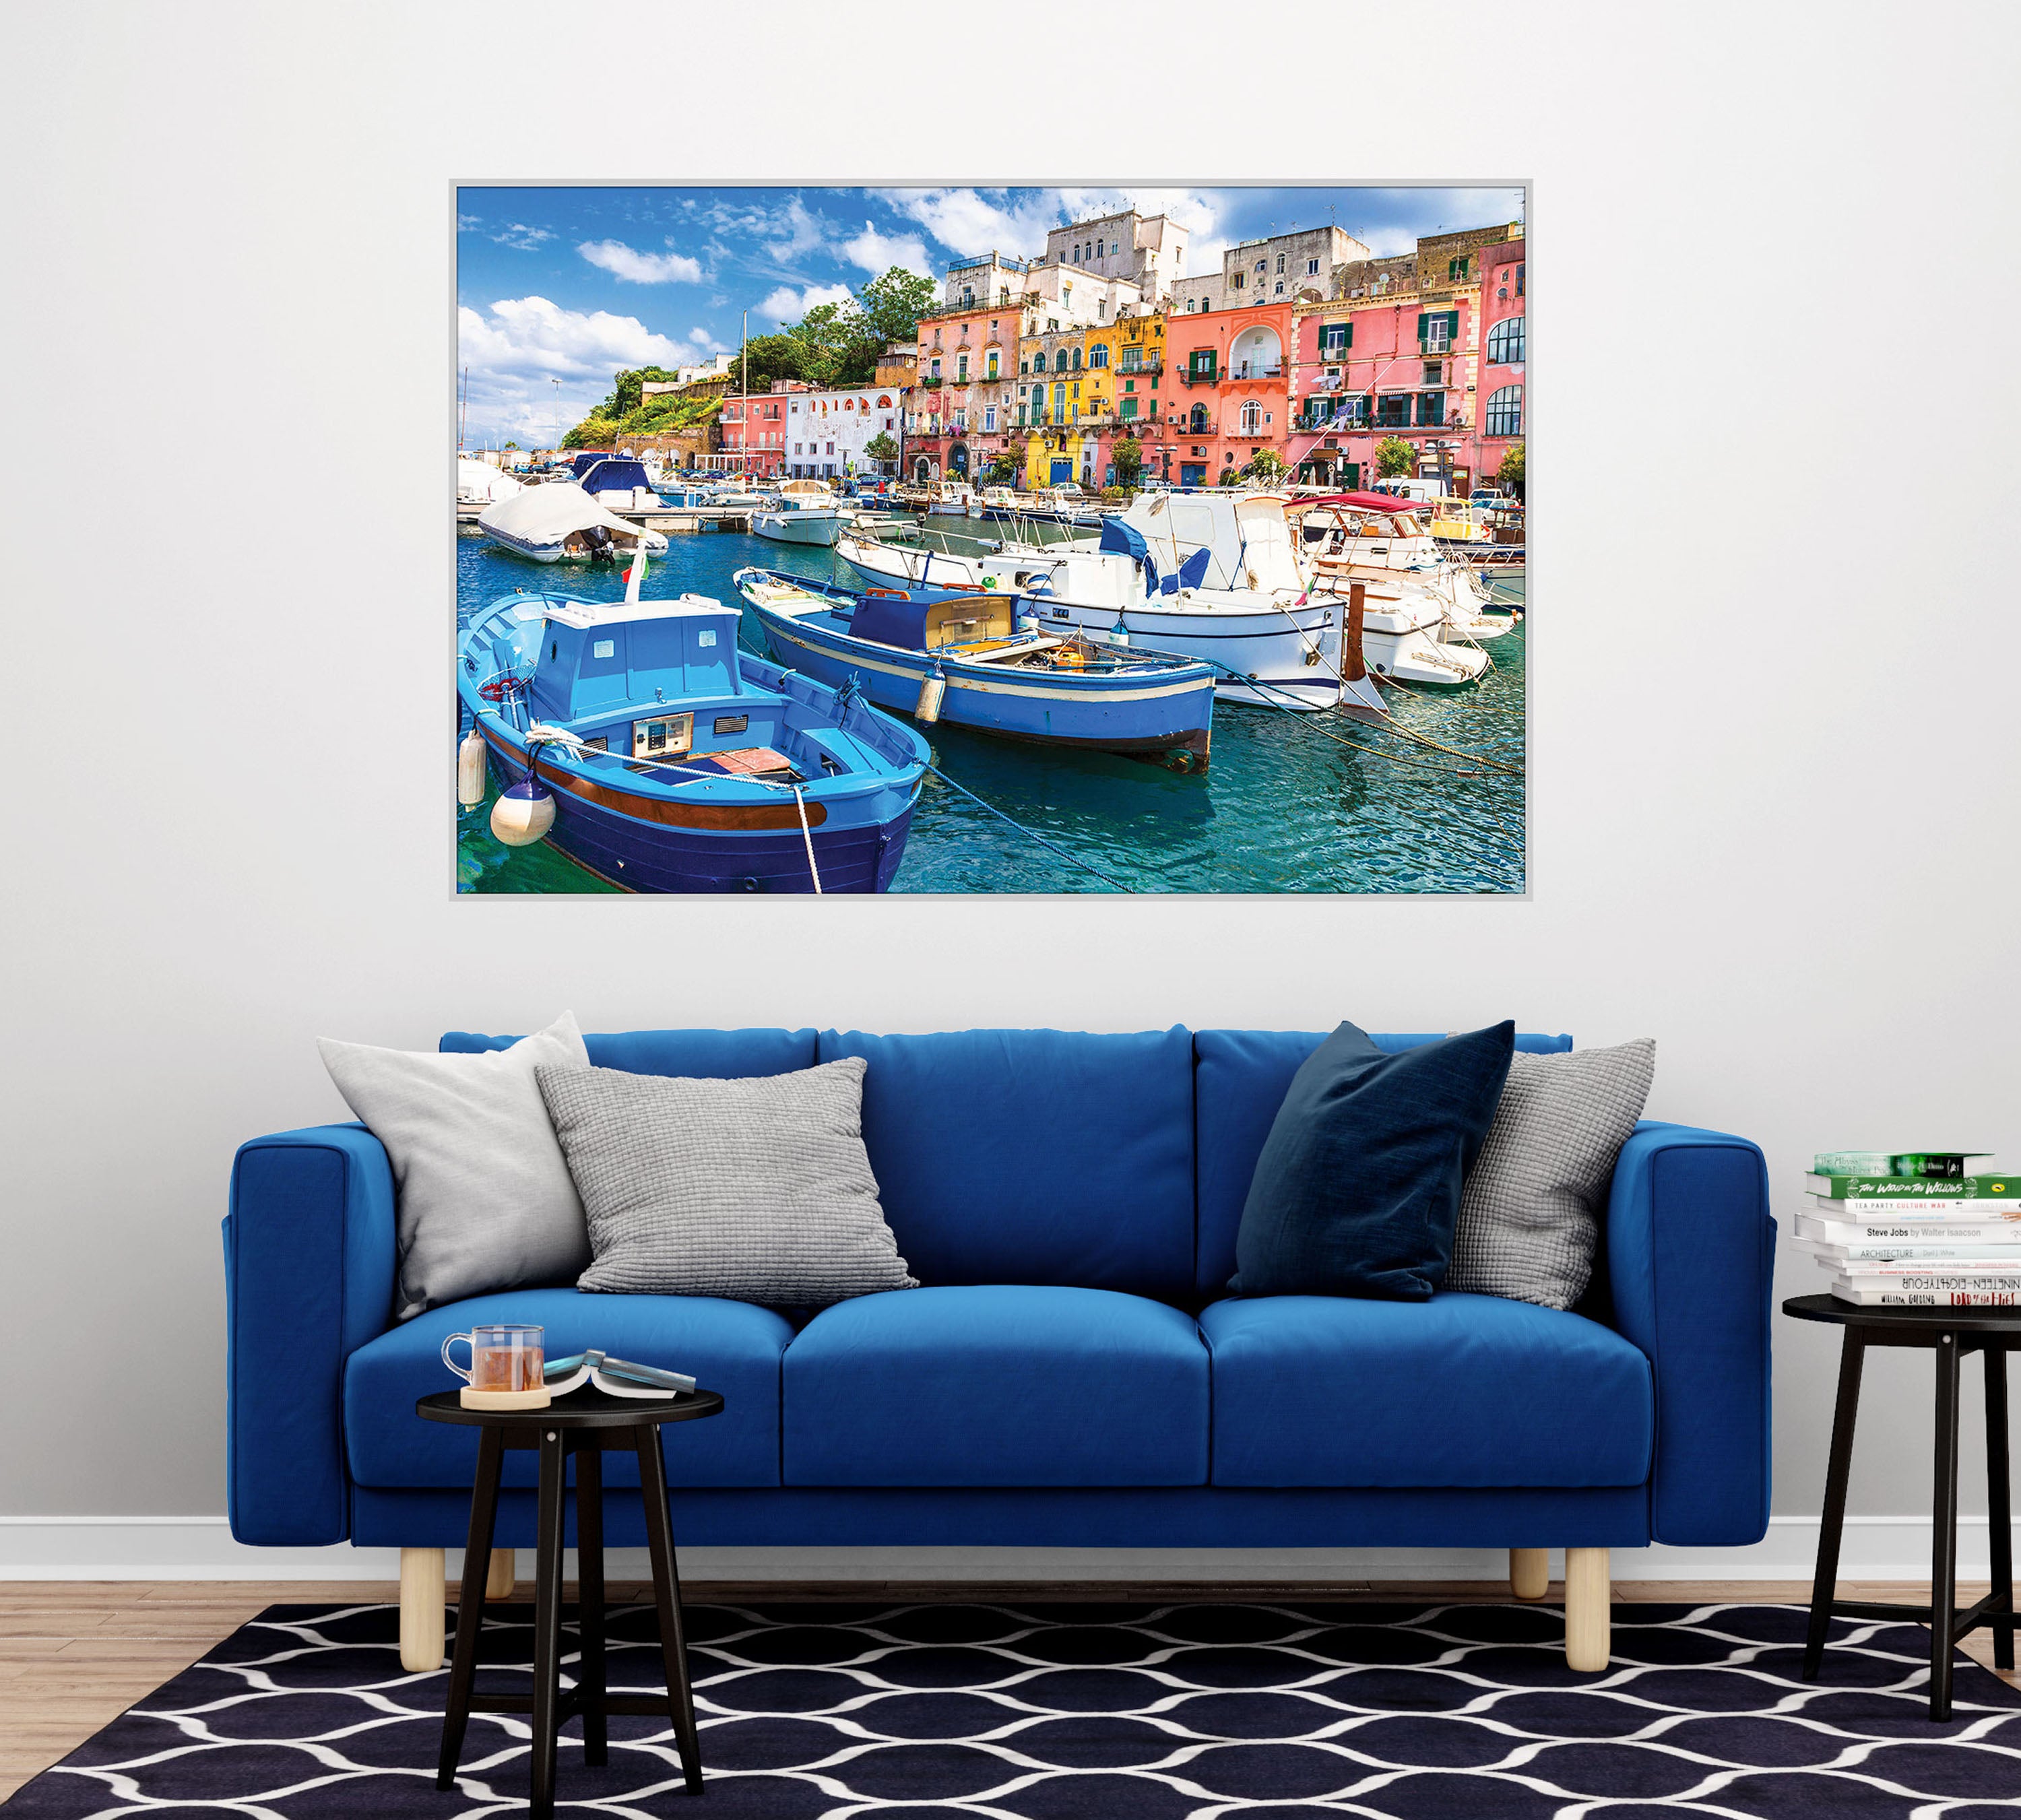 GM018F Grace & Gardenia Venice Canal Premium Peel and Stick Mural 69 inch wide x 46 inch height Blue Pink White